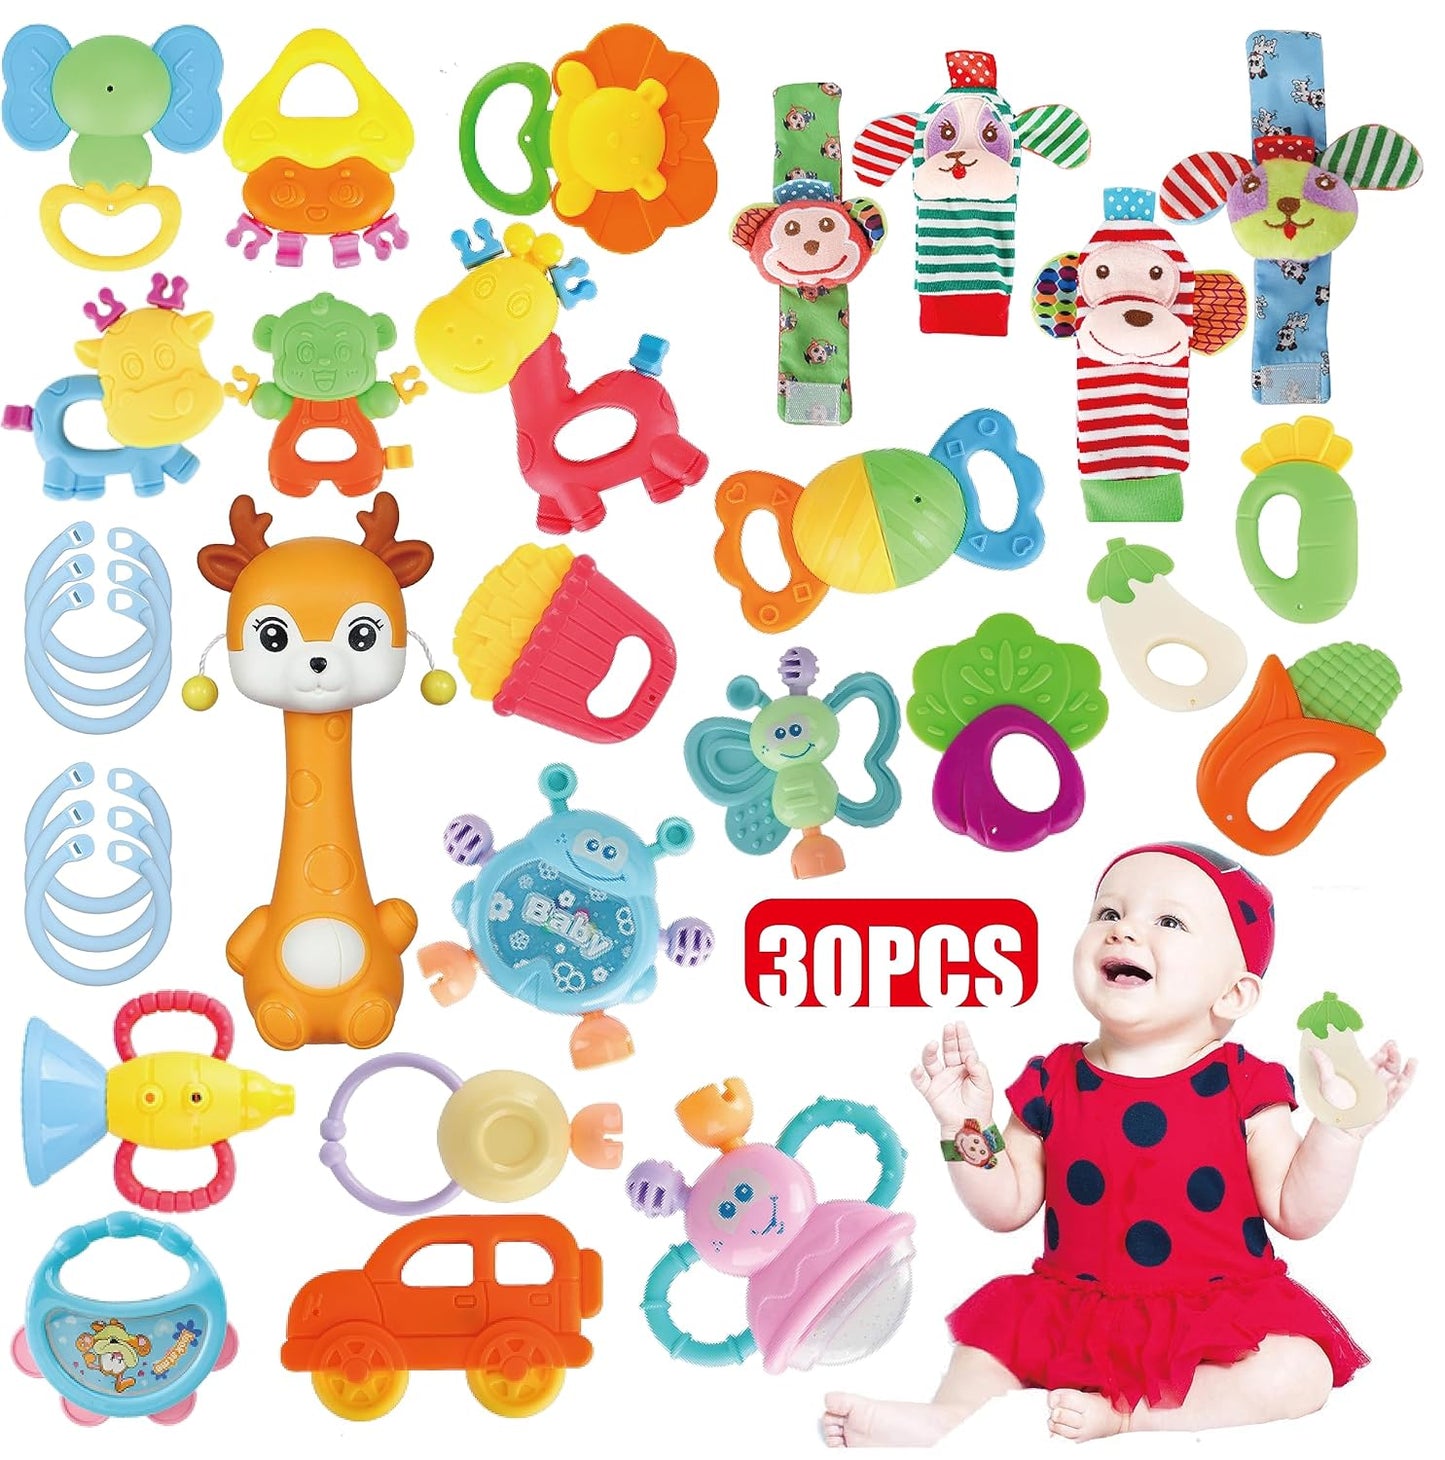 30 Pcs High Contrast Baby Toy Gift Set for Infants